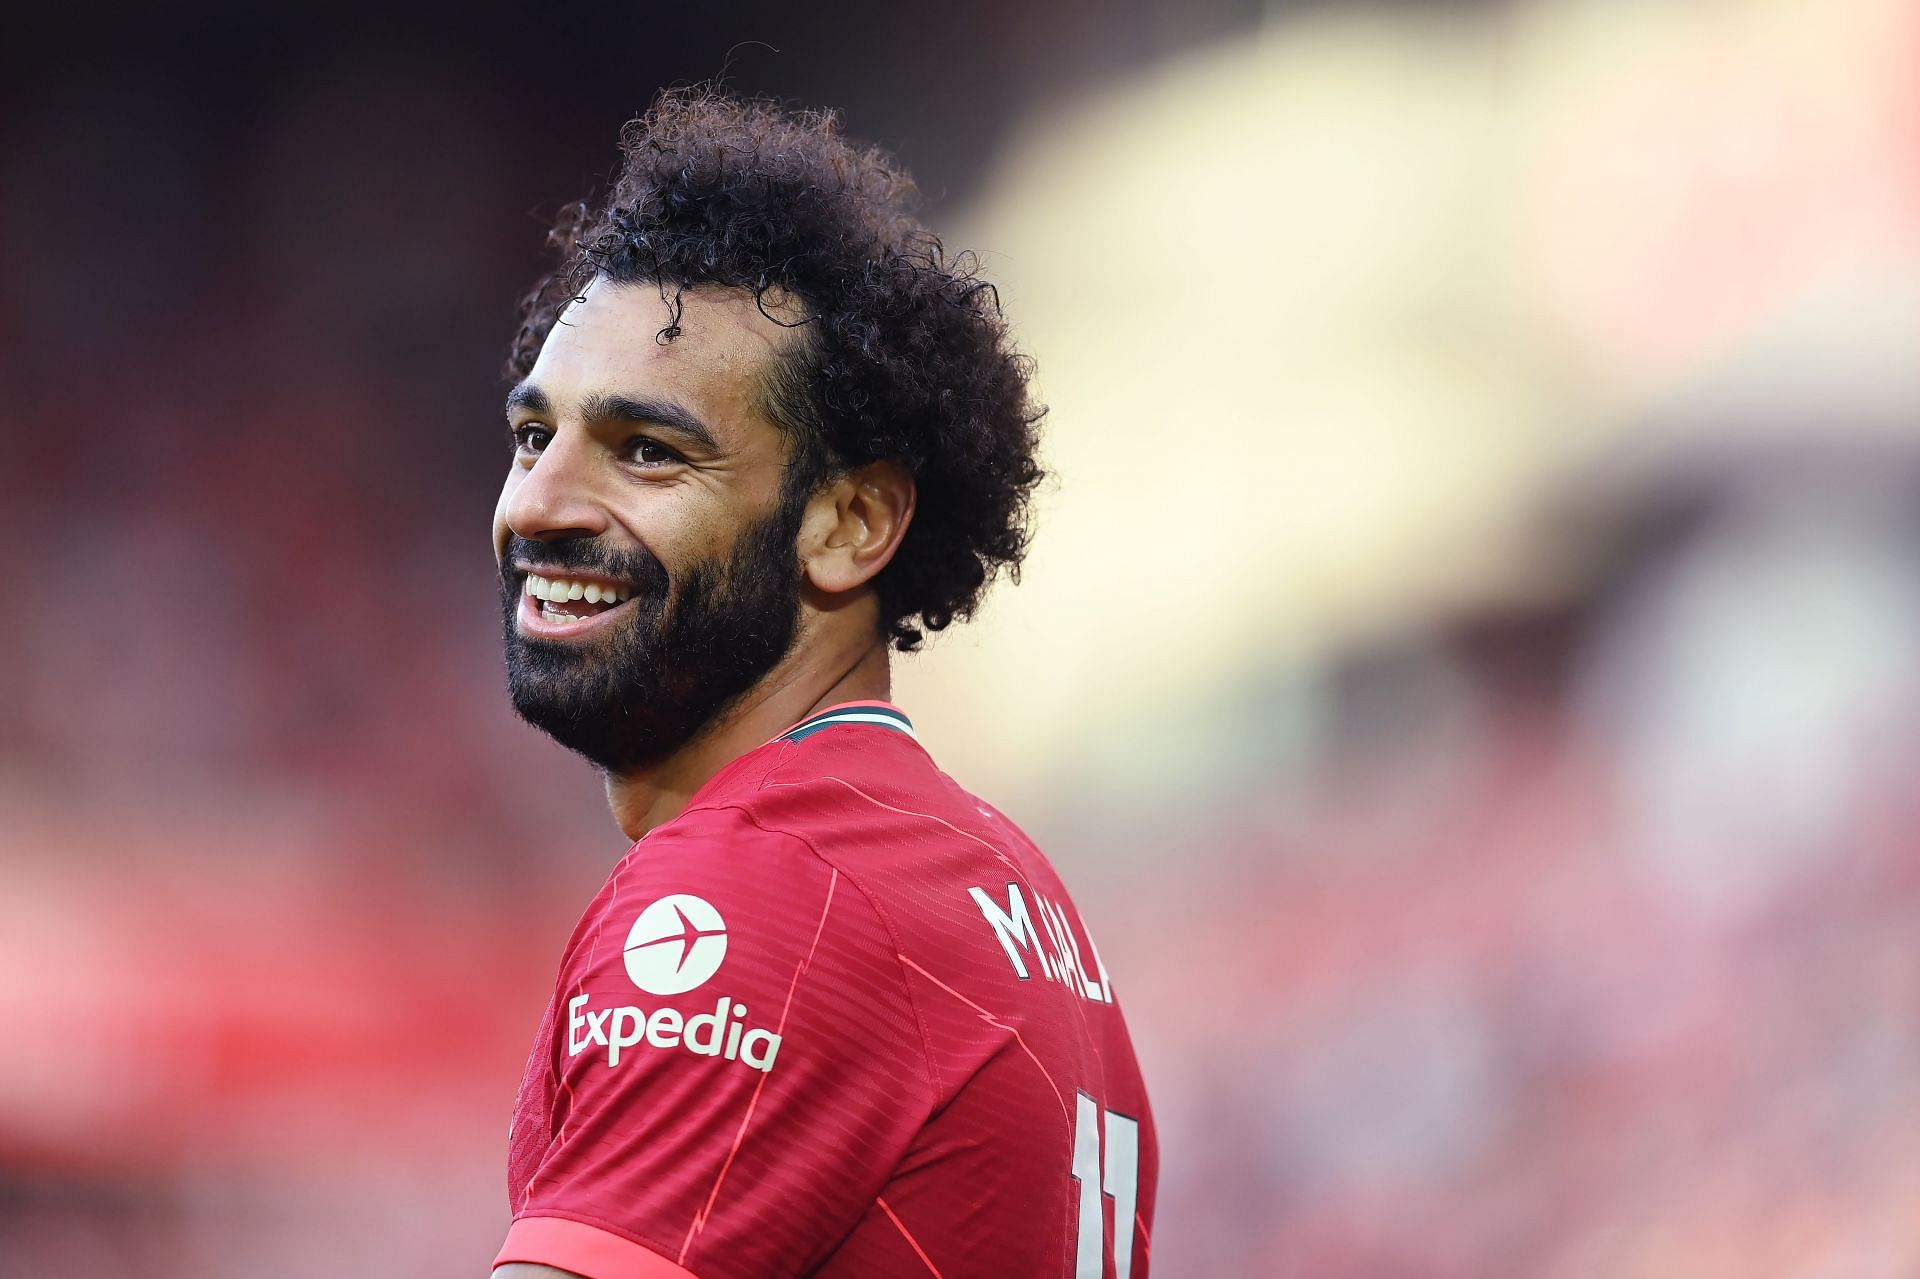 Mohamed Salah has been a goal-scoring machine for Liverpool